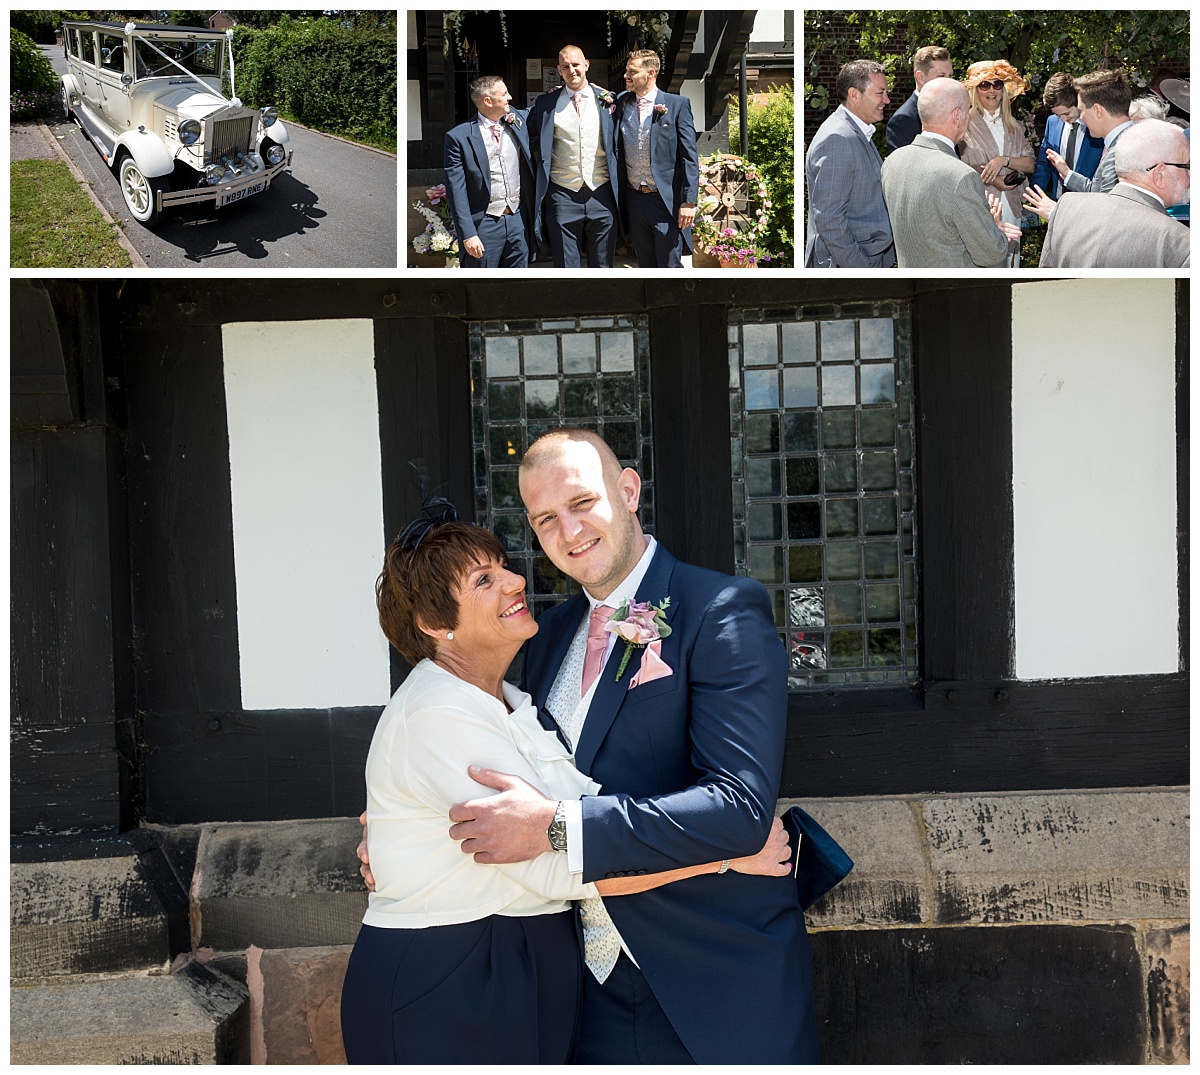 Wedding Photography Manchester - Melissa and Stuarts Mere Golf Resort And Spa Wedding Day 21